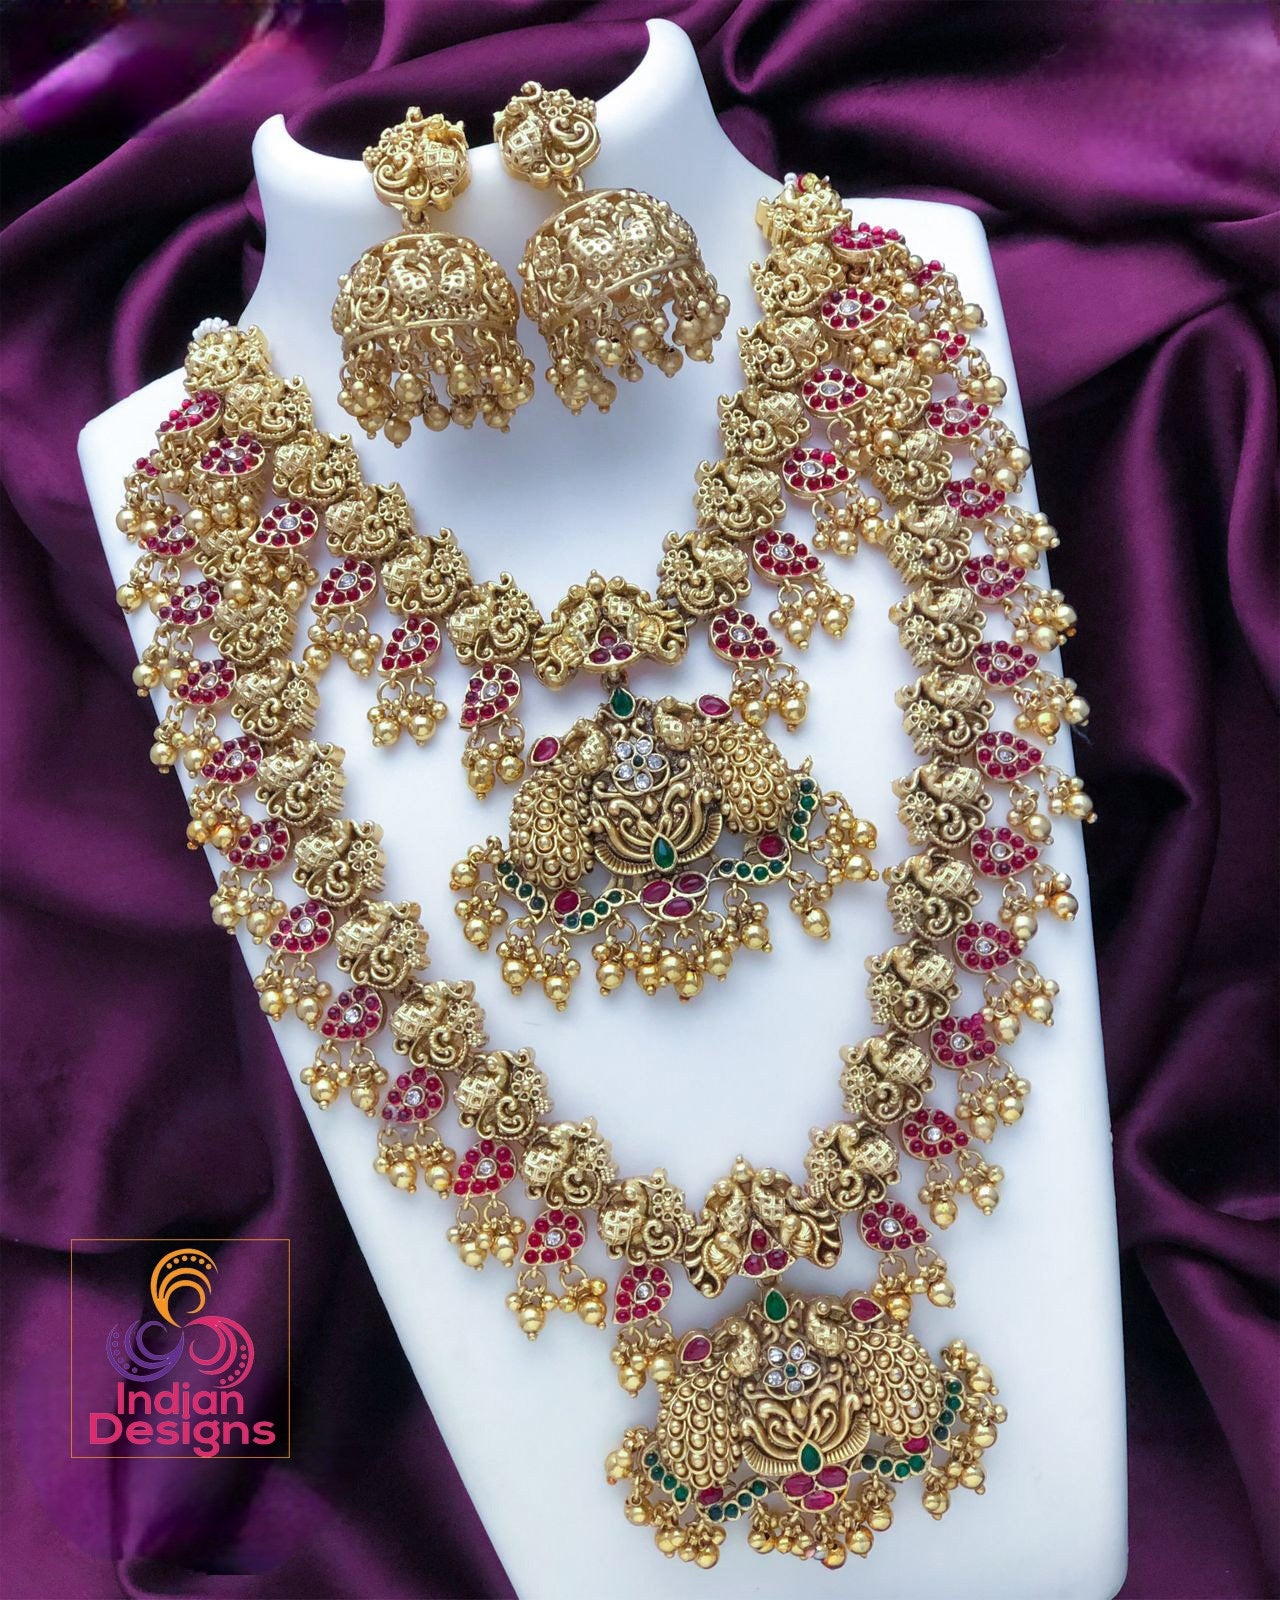 Gold Plated Matte Finish Indian Wedding Temple jewelry with Jhumkas| South Indian Bridal Jewelry set | Bridal Guttapusalu Long & short haram